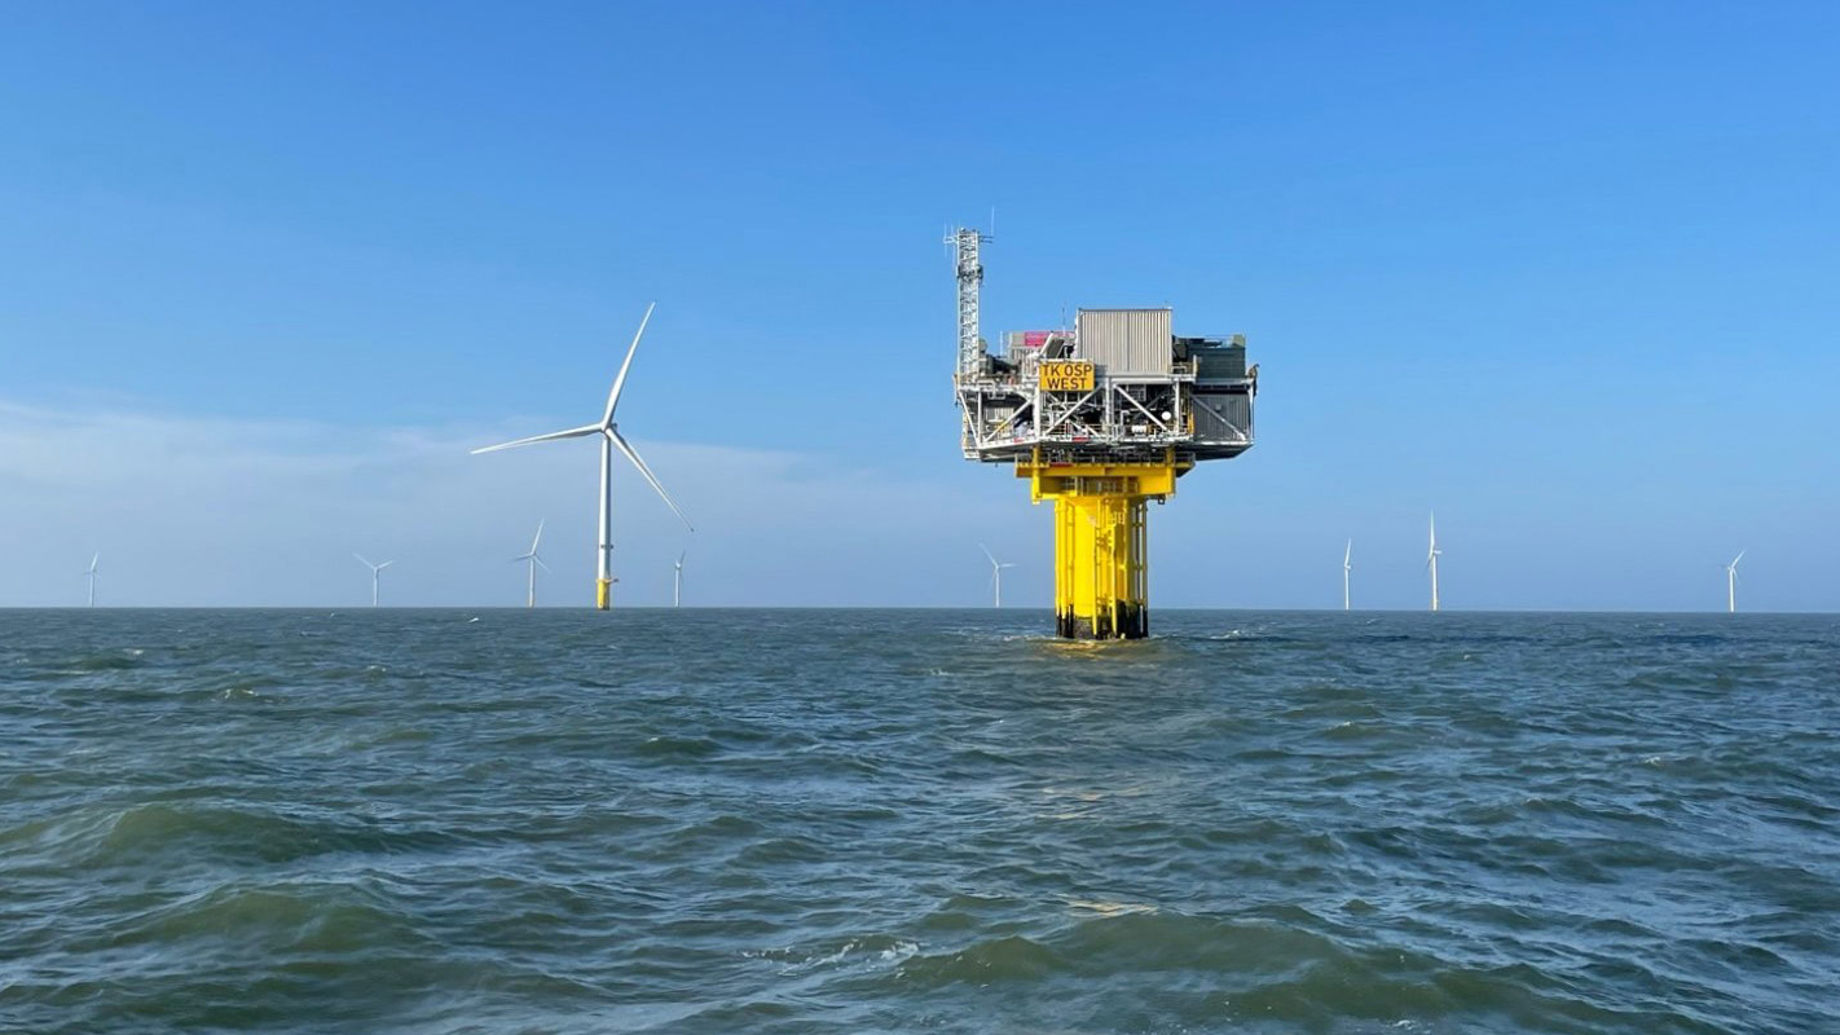 Wind infrastructure in the North Sea